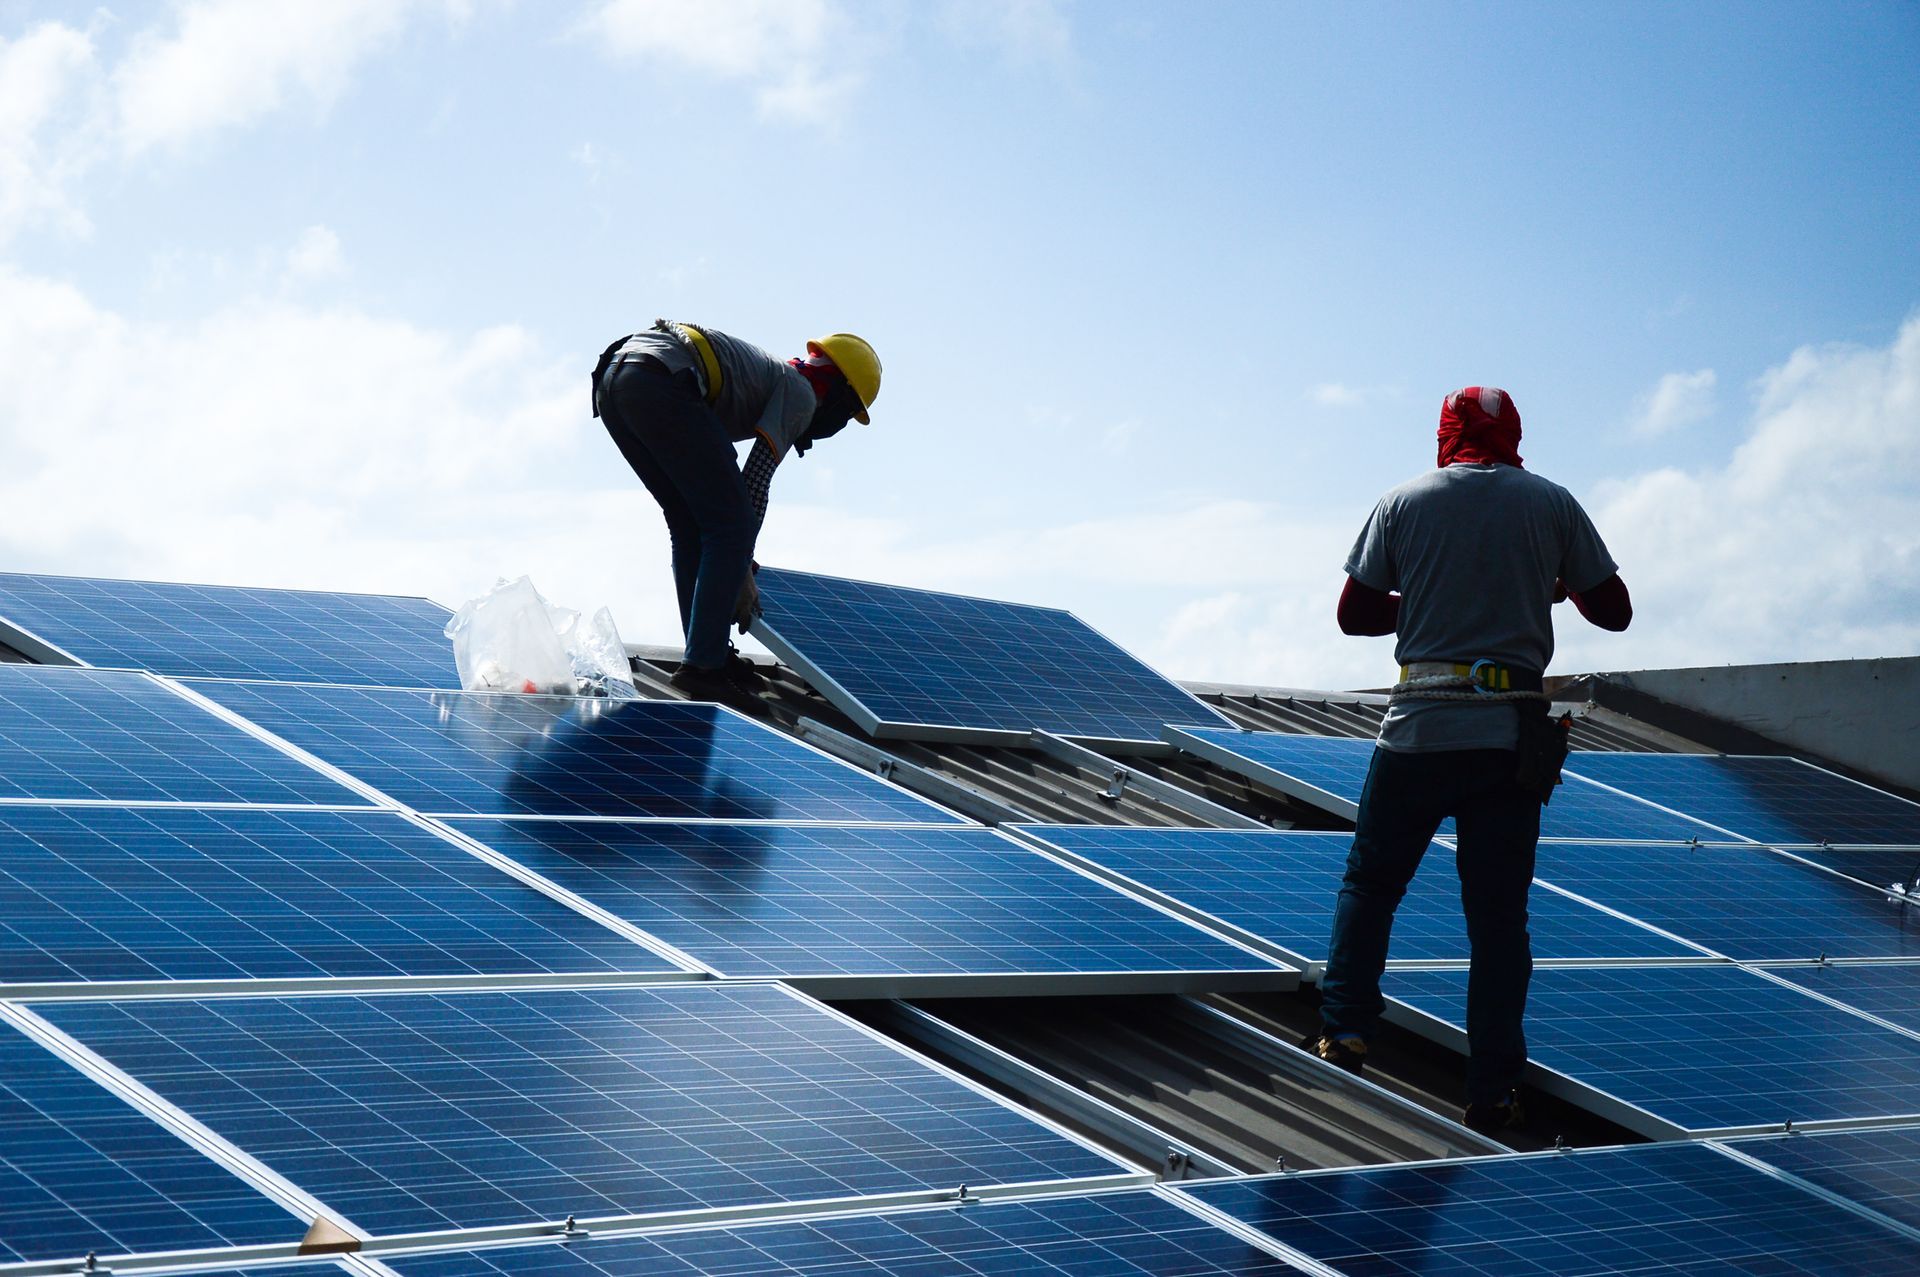 Two men are installing solar panels on the roof of a house.